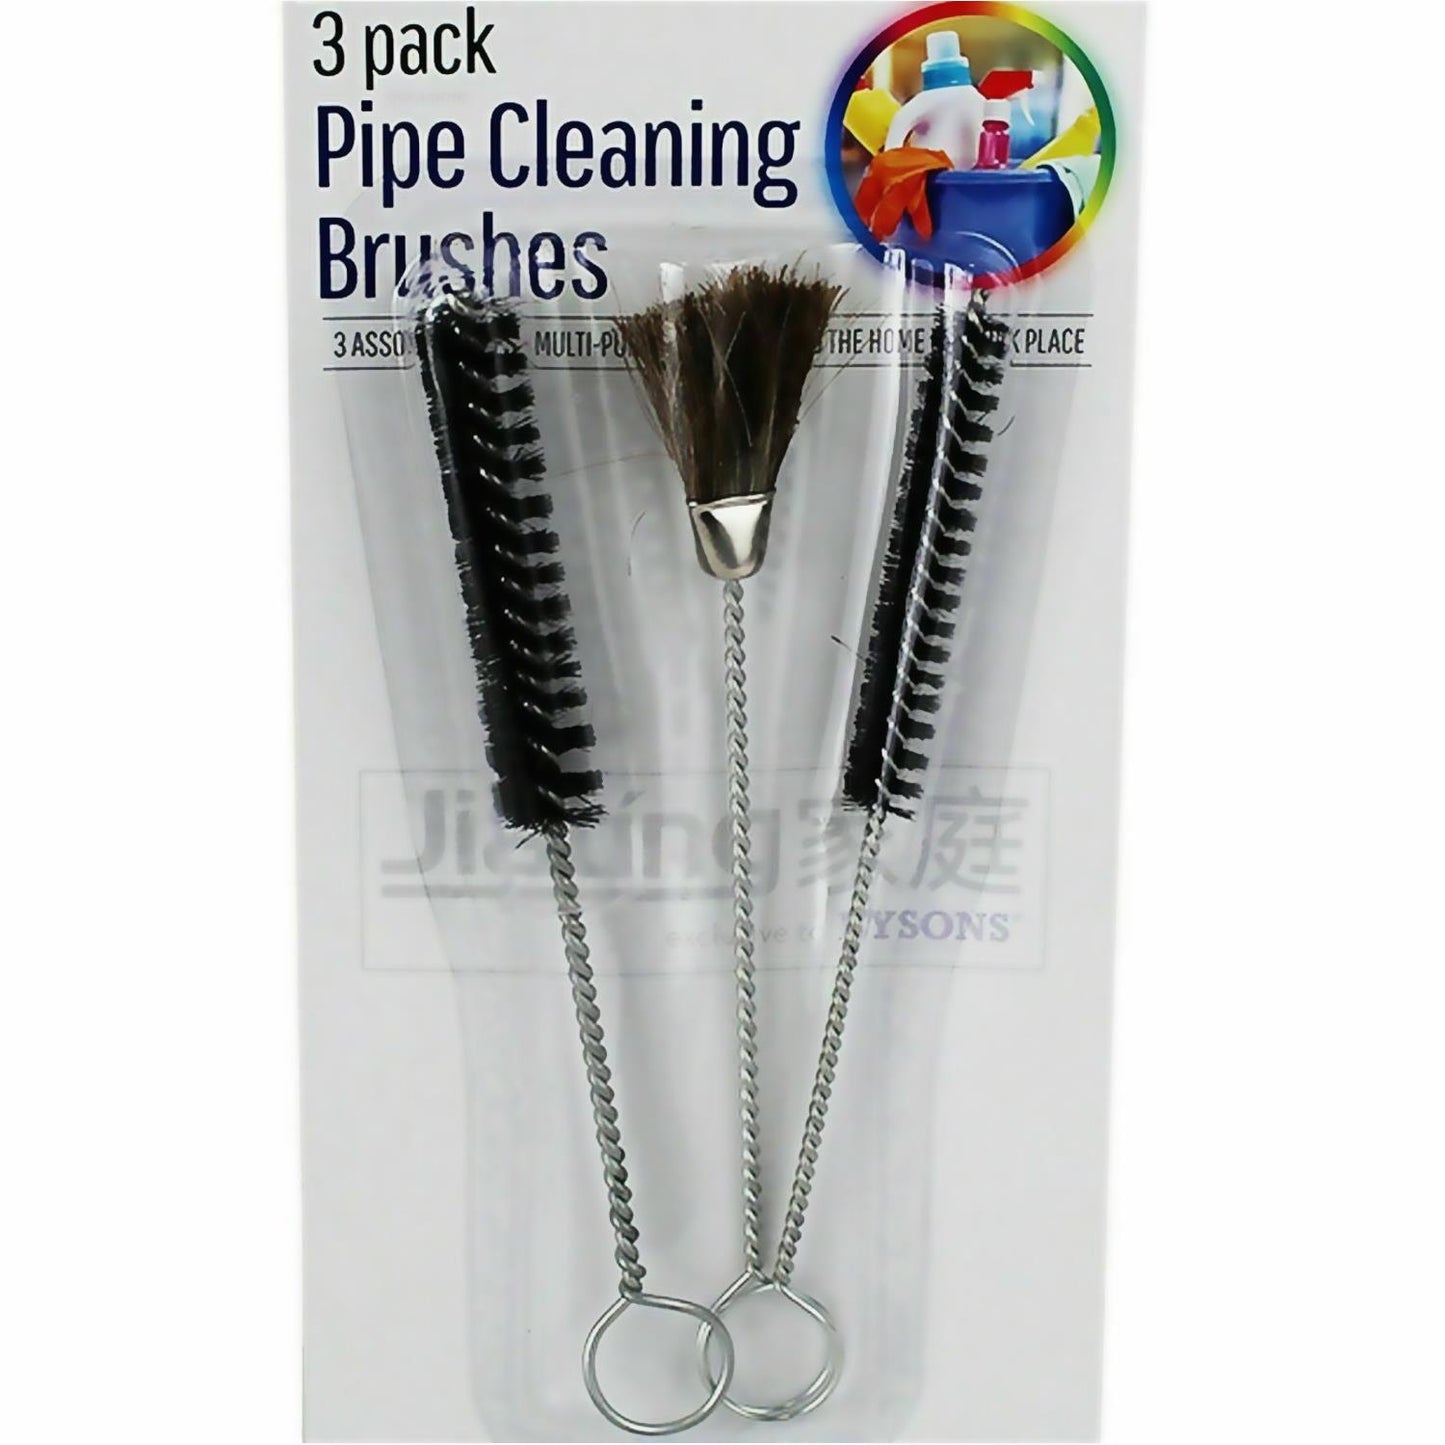 Handy Set Of Mini Cleaning Brushes For Small Spaces And Detailing